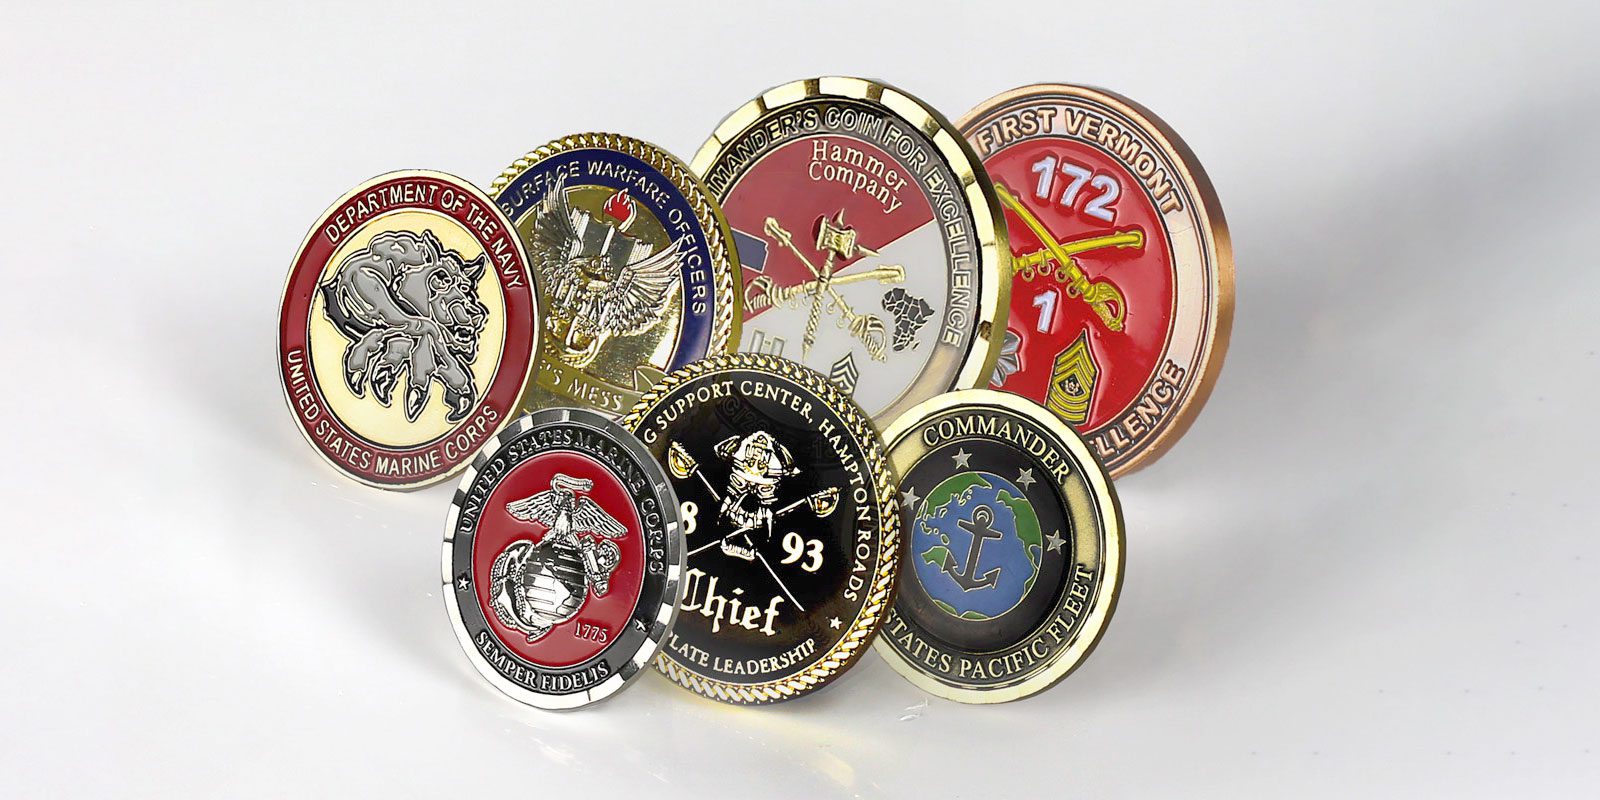 12 Essential Rules of Challenge Coin Etiquette